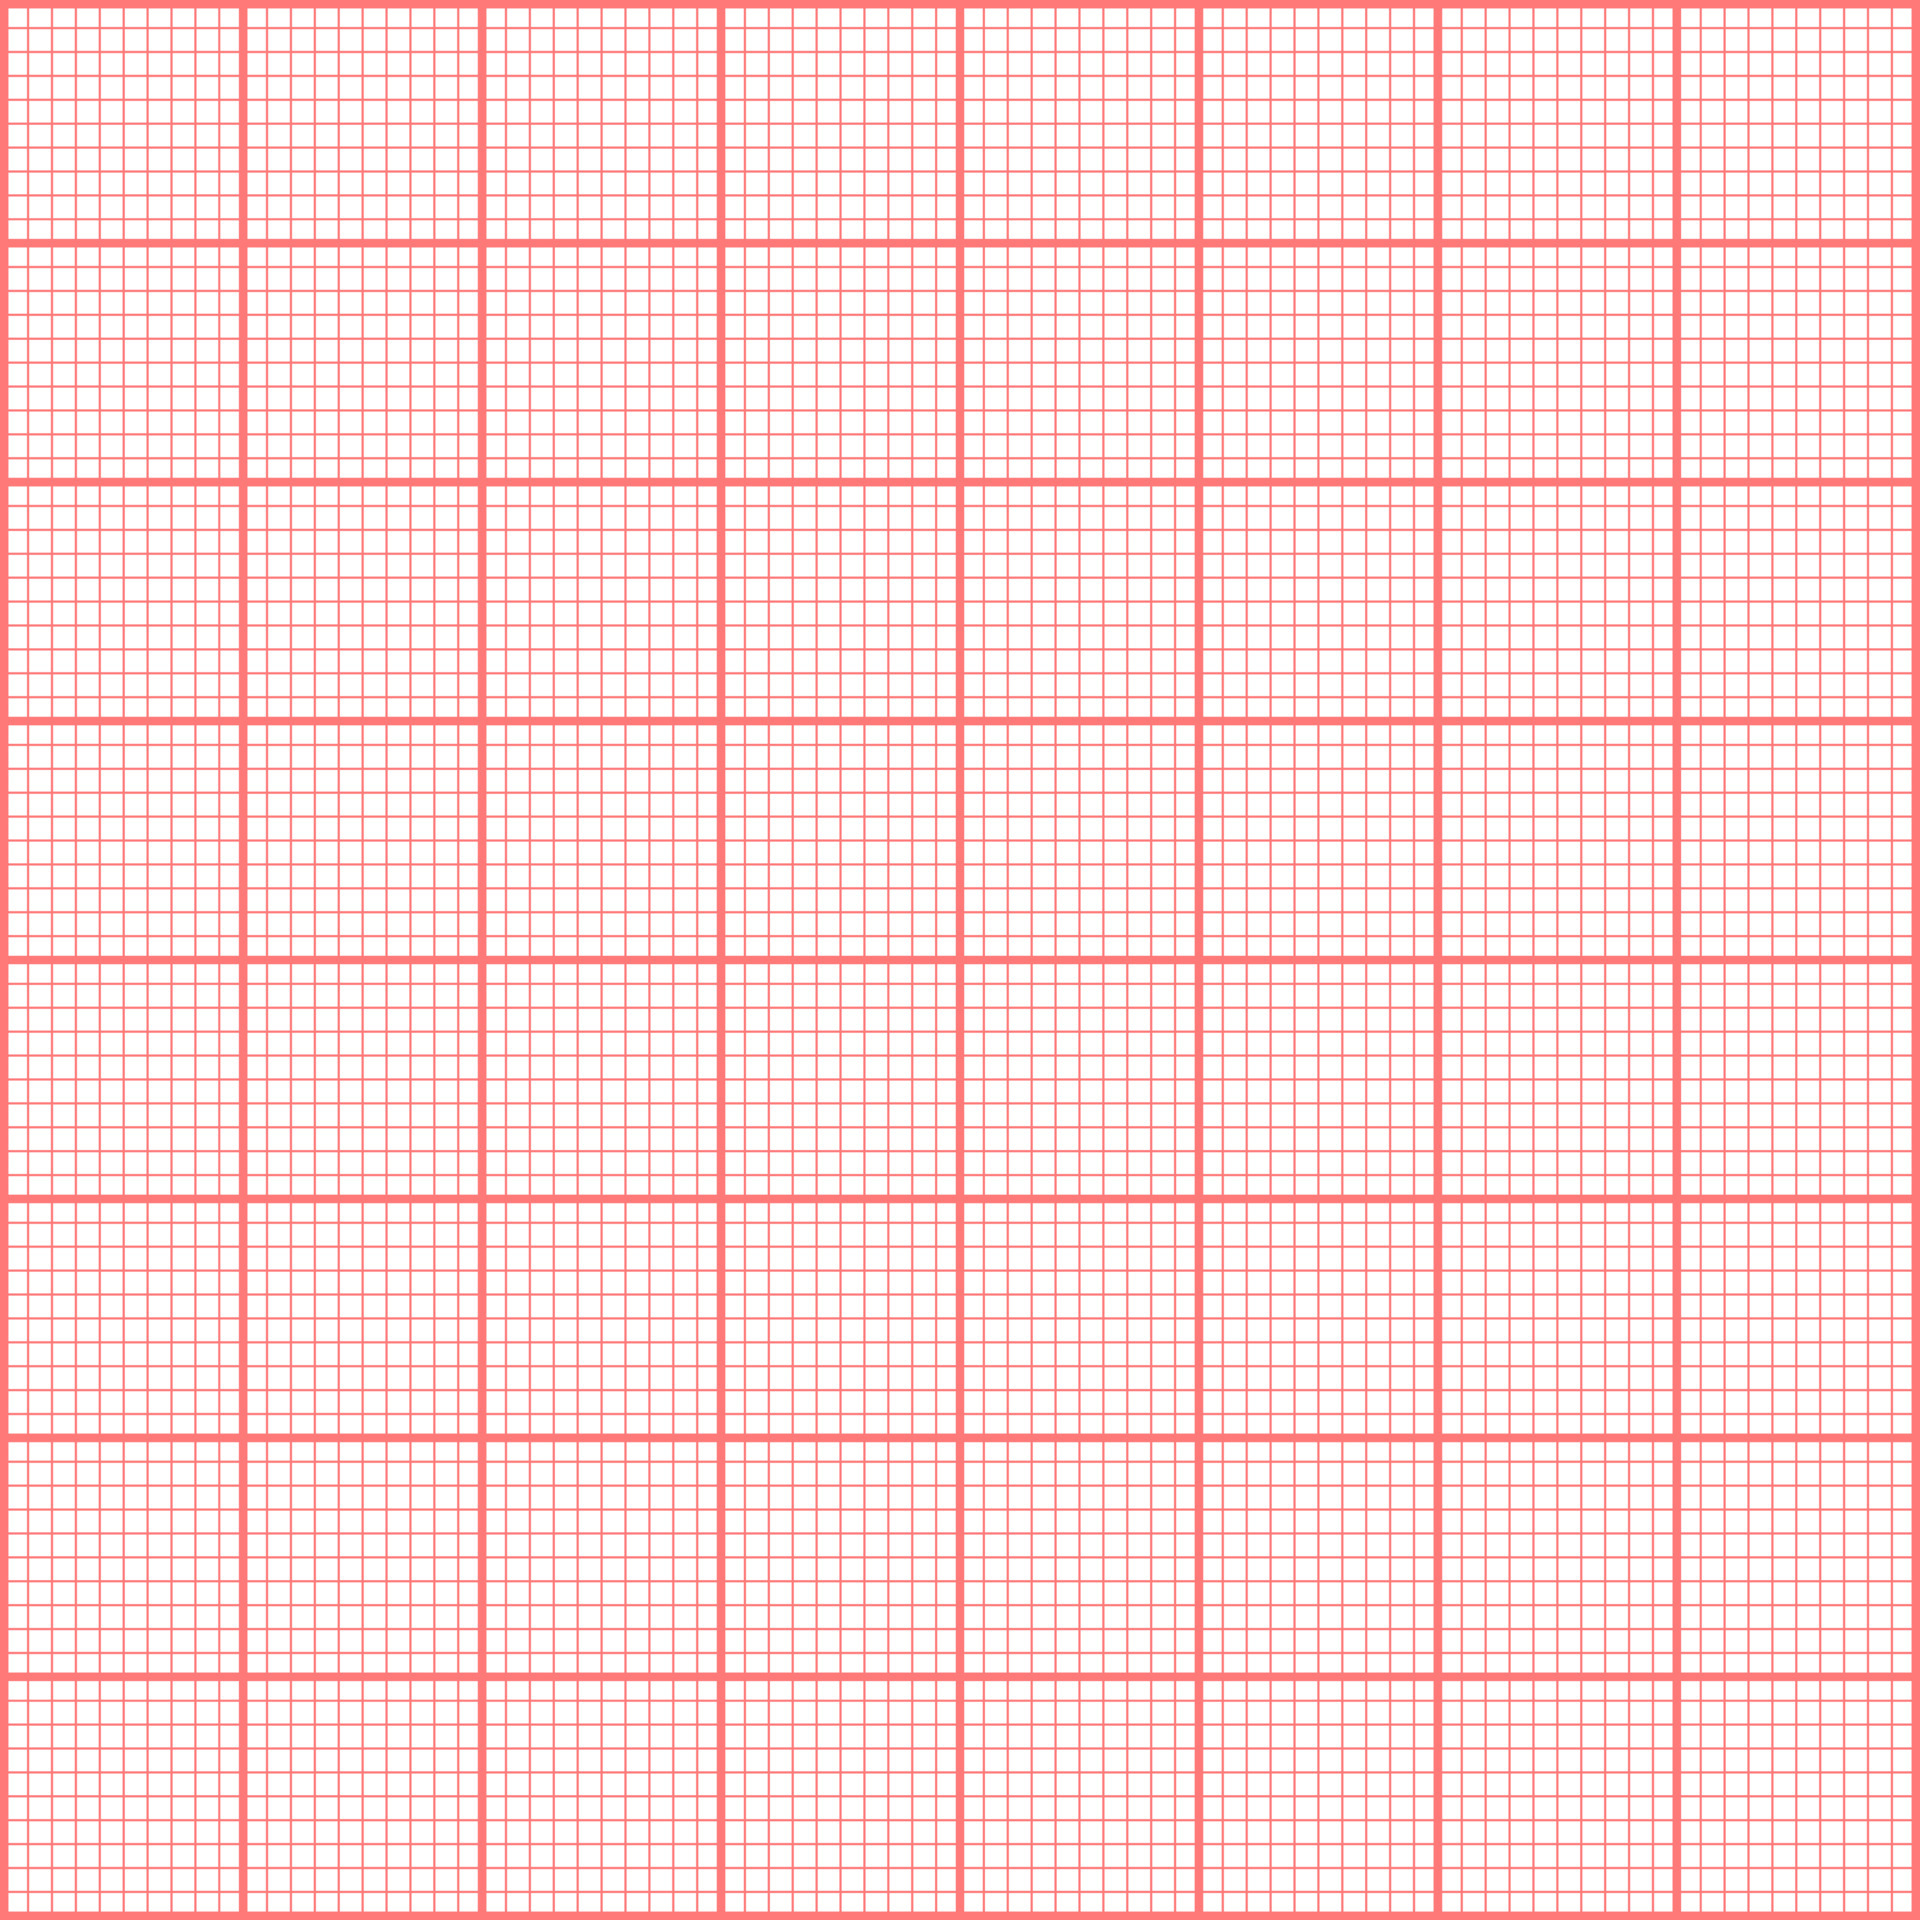 Graph paper millimeter grid. Pattern for drawings, engineering